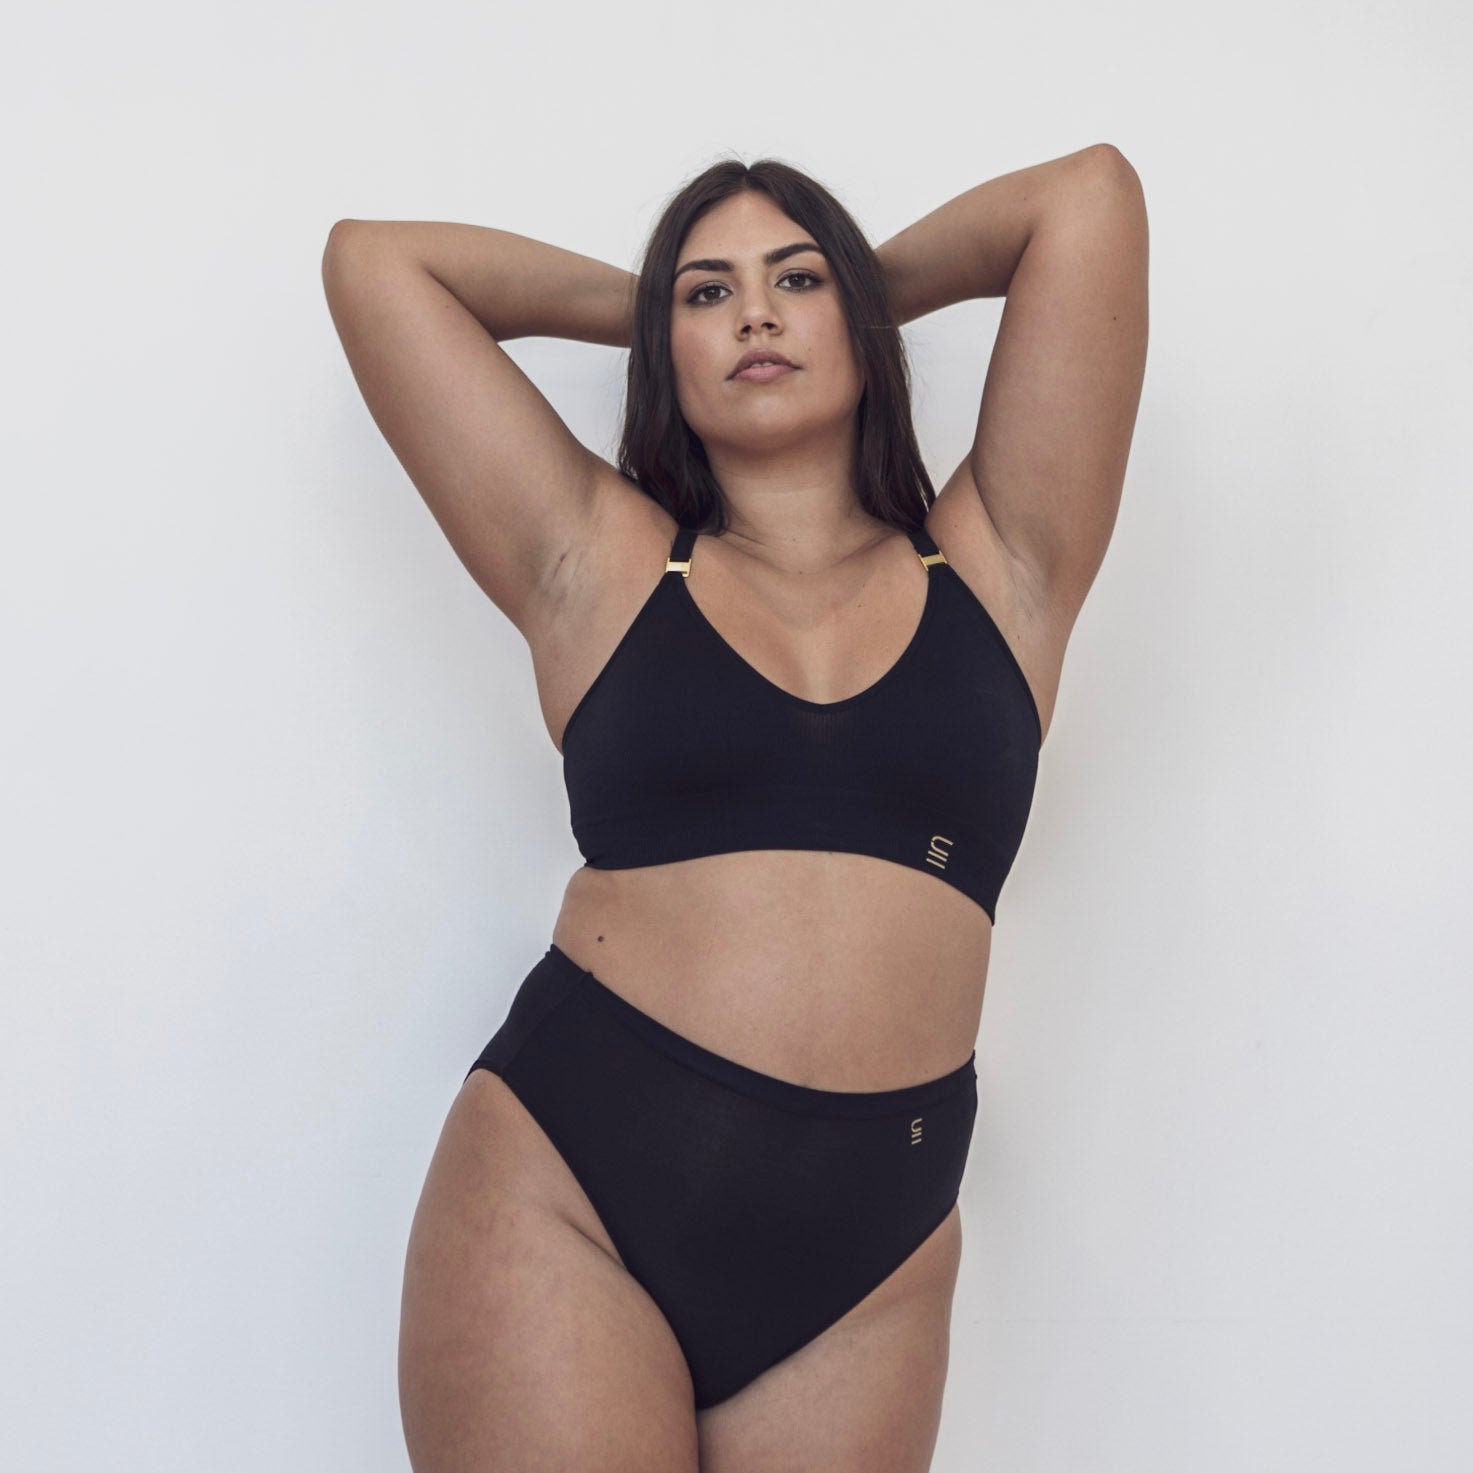 Sustainable Black wireless bra by Underwear For Humanity: ethical, sustainable. A -D cup sizes. Recycled materials, flexible, supportive. Knitted bra and band, adjustable straps. Model wears A-D bra